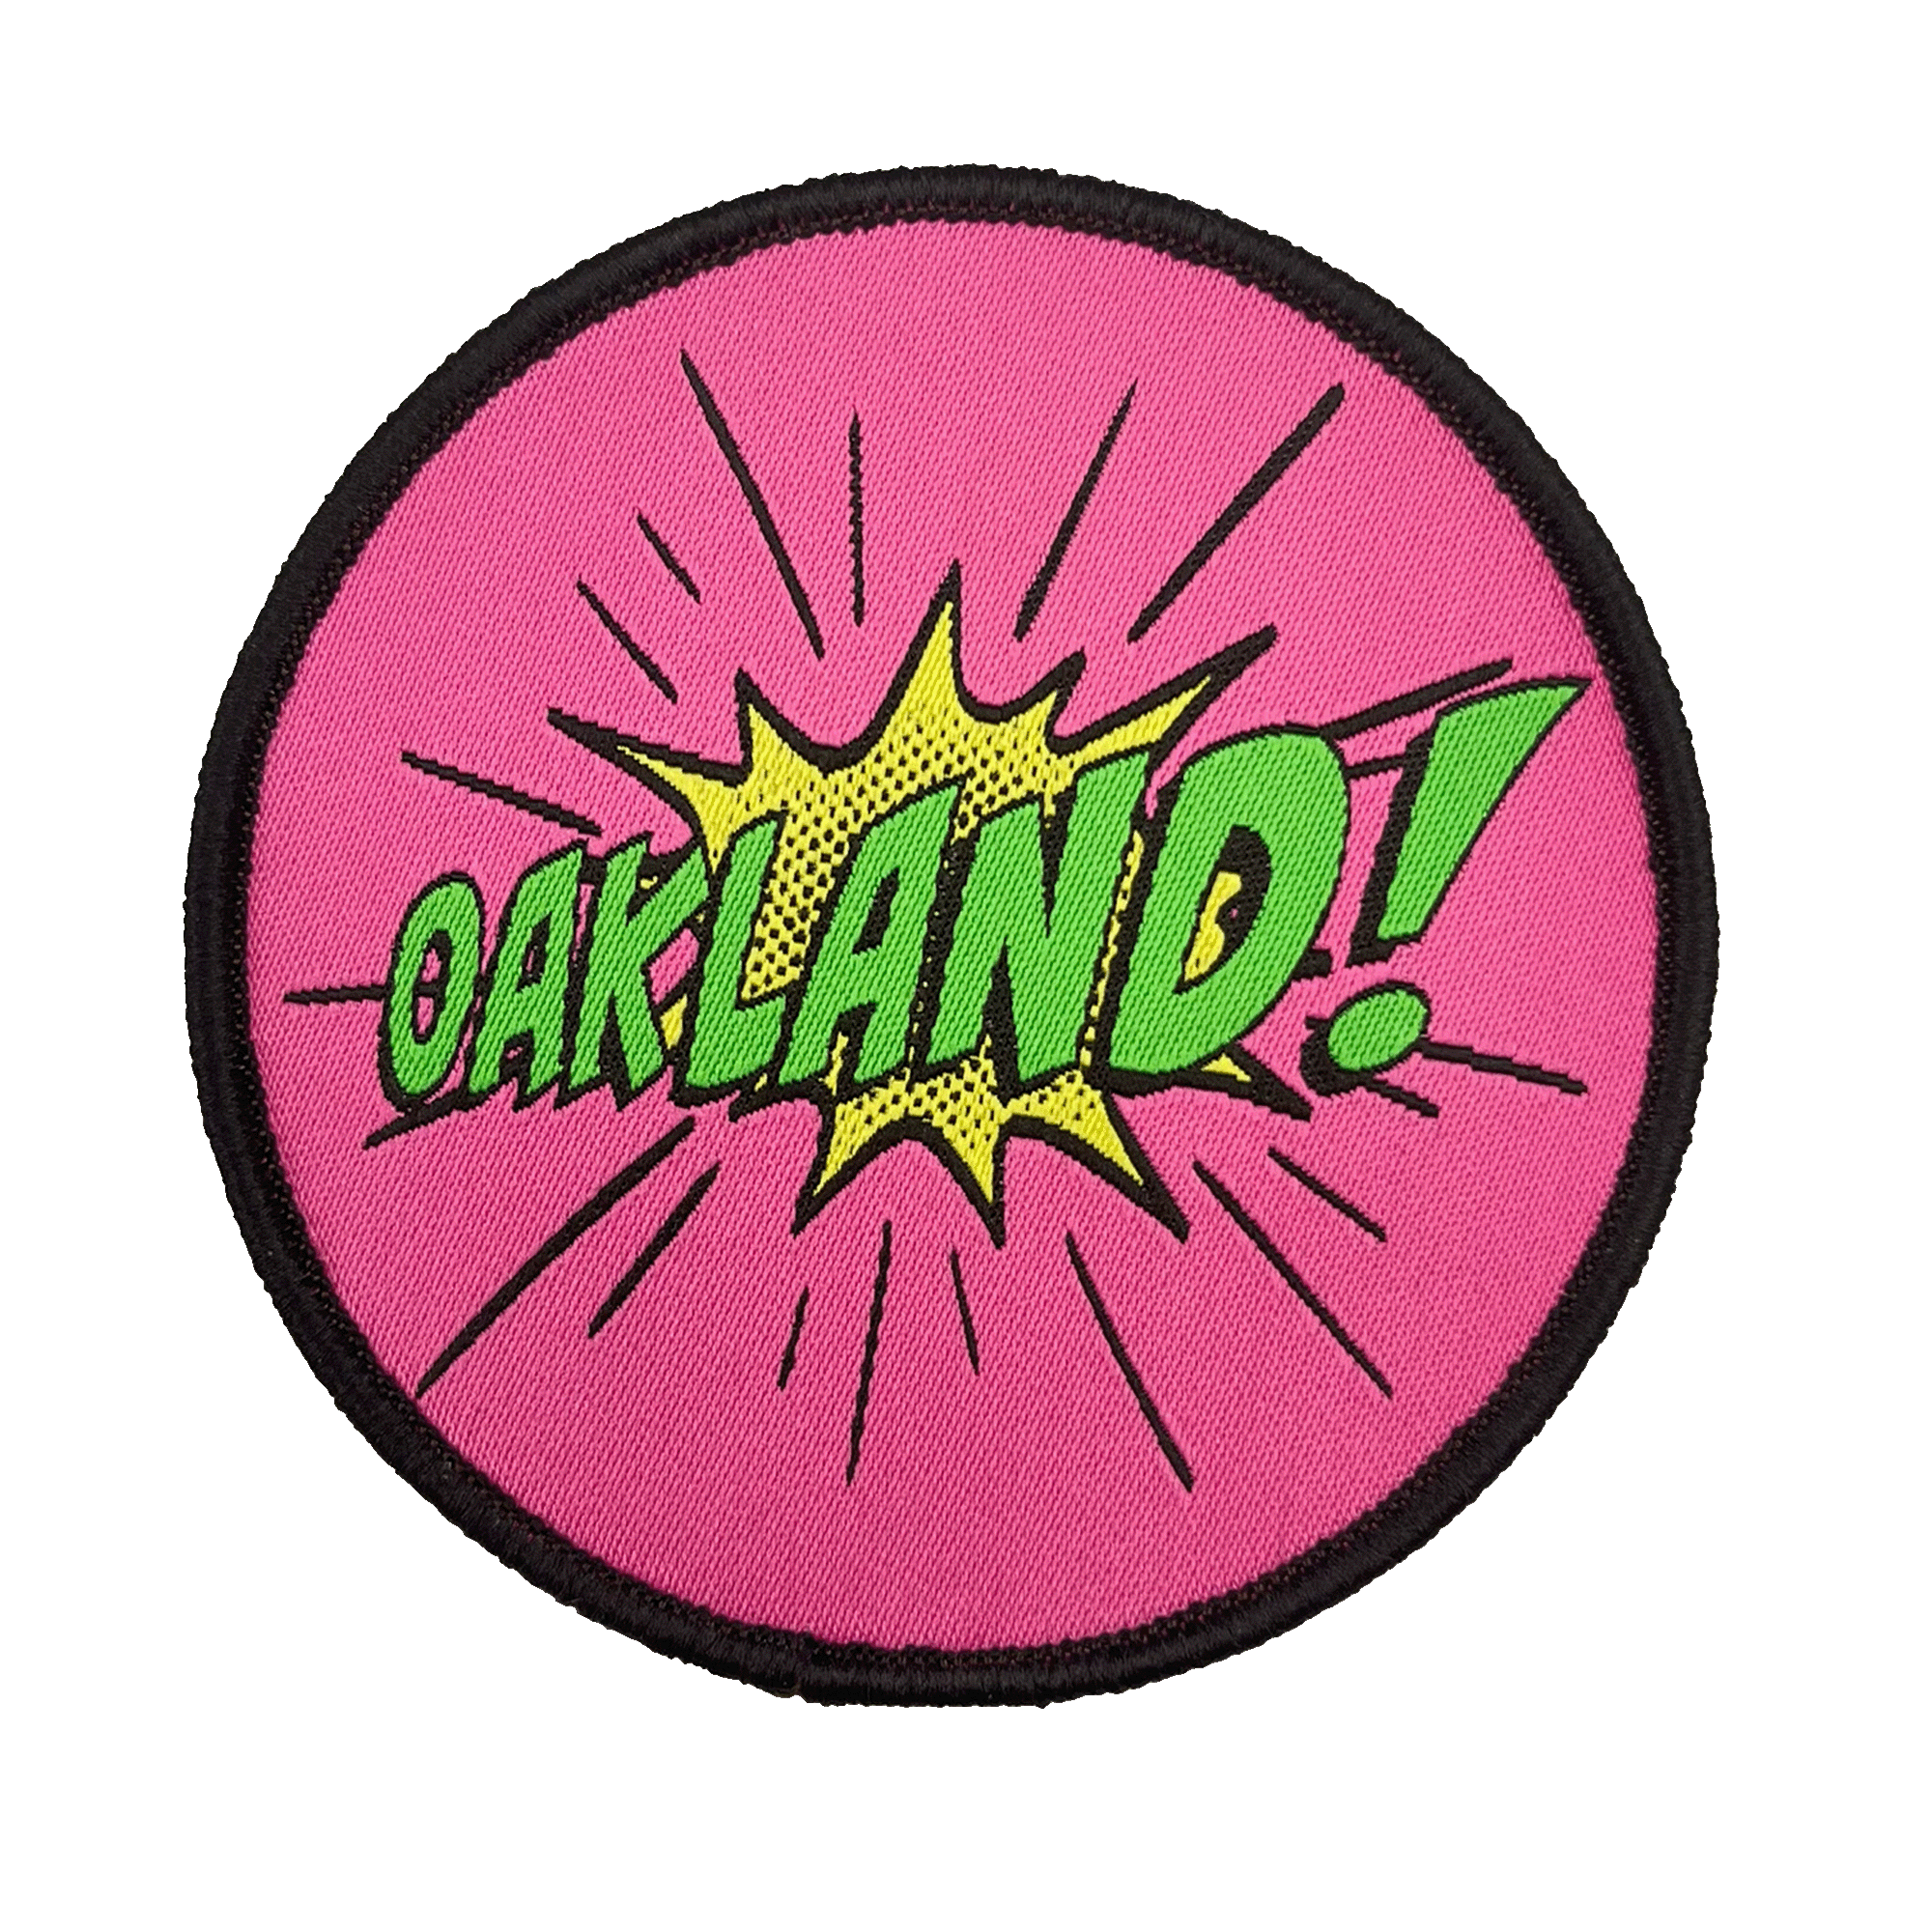 Embroidered iron-on patch with Oakland wordmark in comic cartoon punch style in pink, green and yellow.